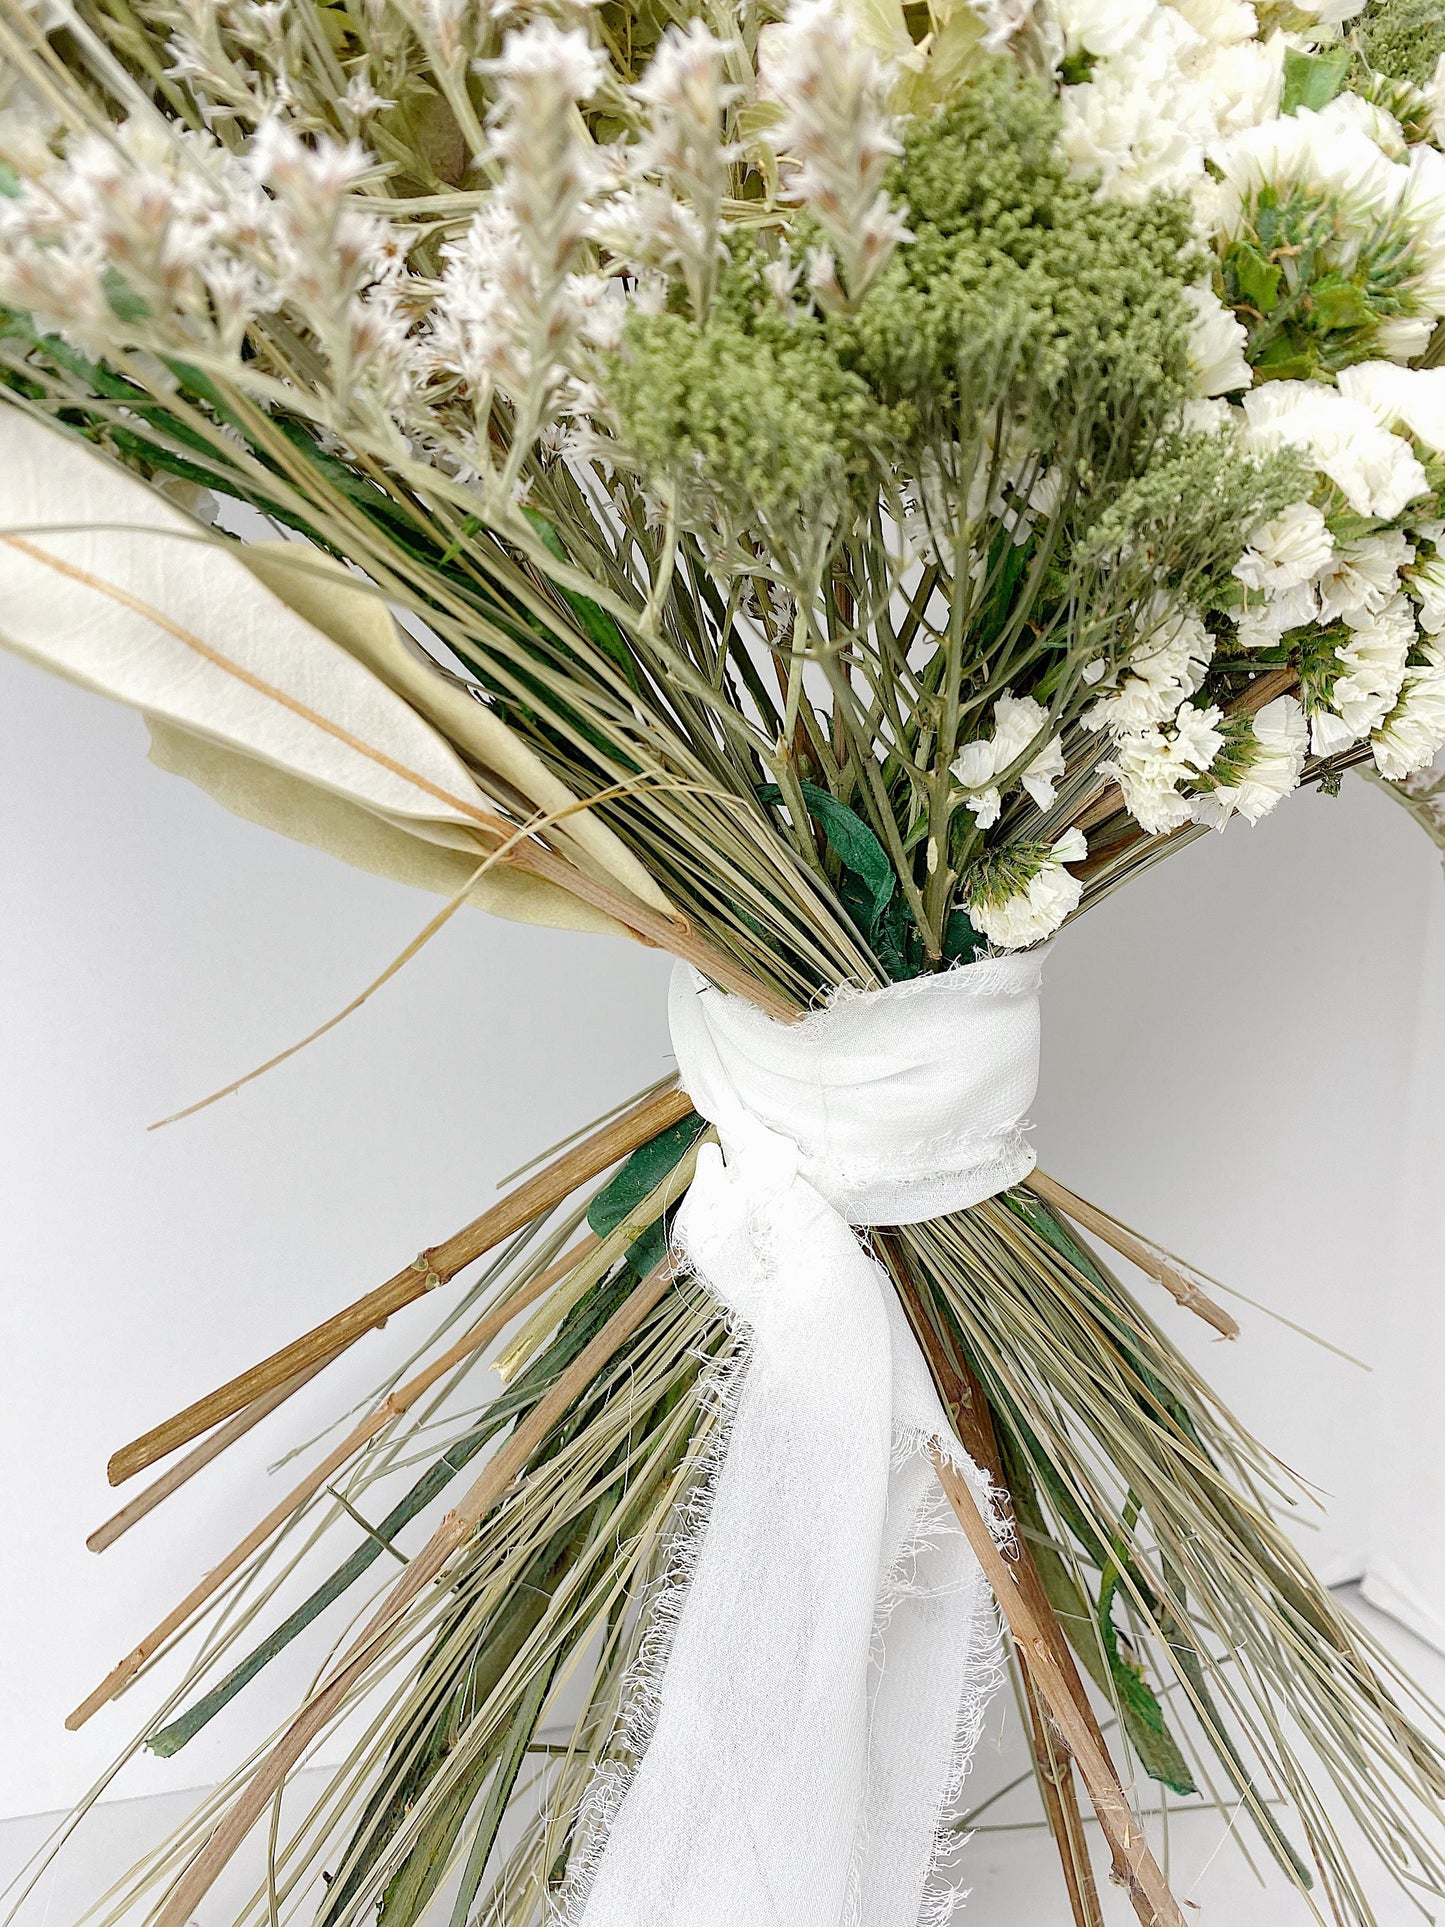 Wedding Bouquet, Green and White, Summer Bouquet, Hydrangeas, Bridal, Floral, Preserved Flowers, German Statice, Neutral, Ribbon, Decor